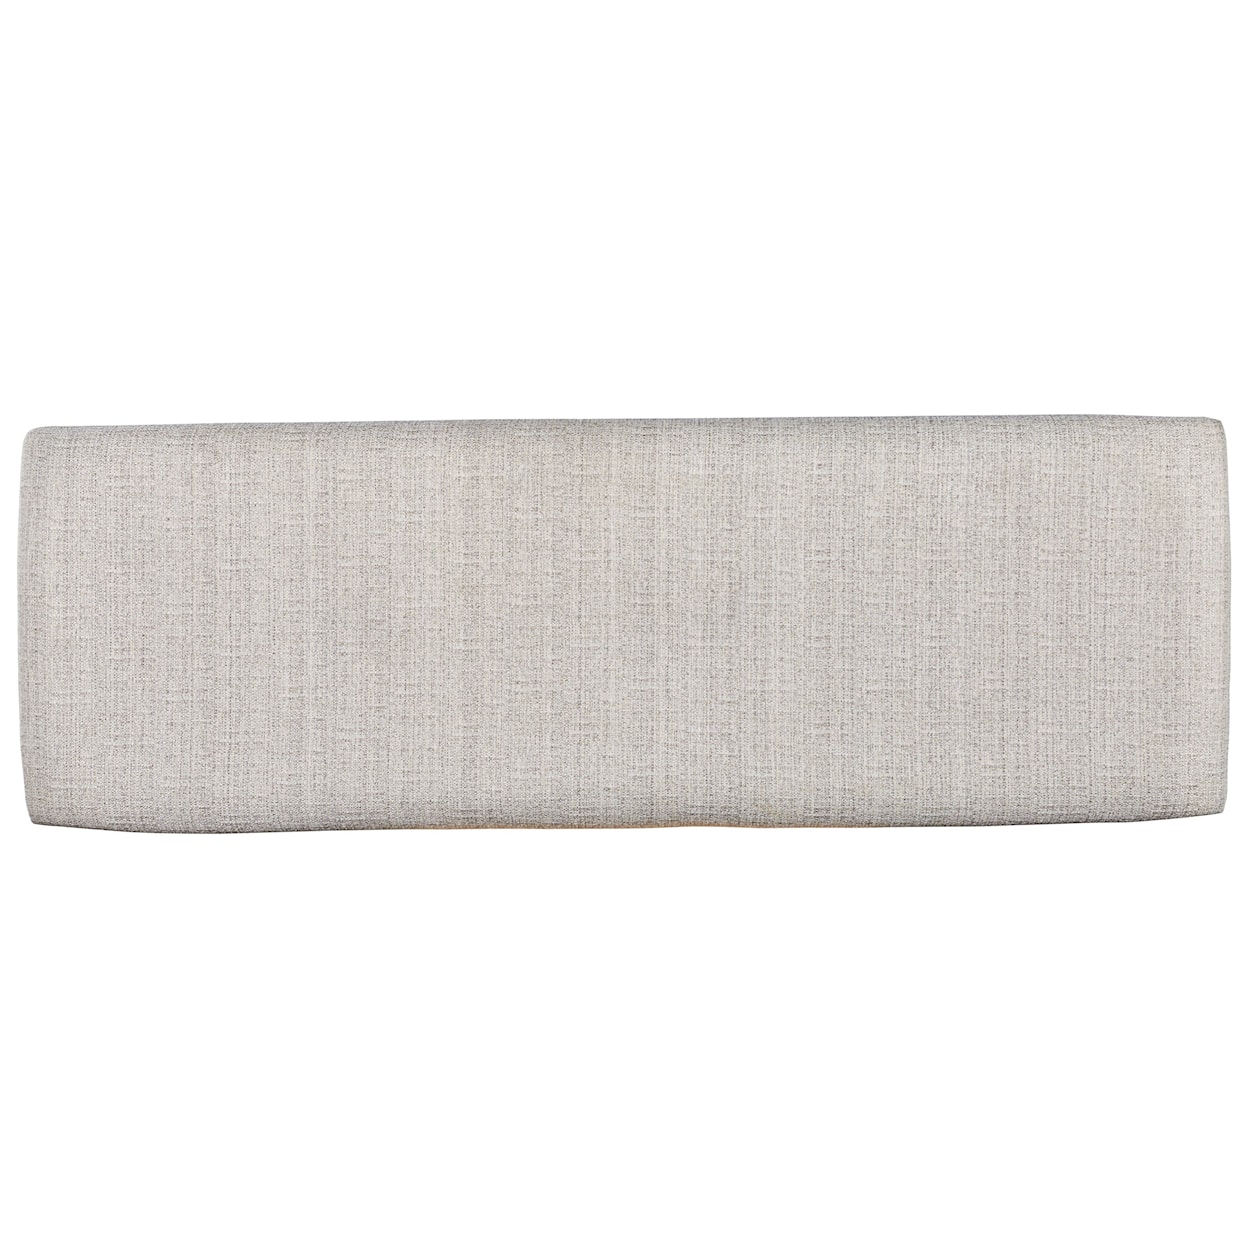 Signature Design by Ashley Maretto Upholstered Bench